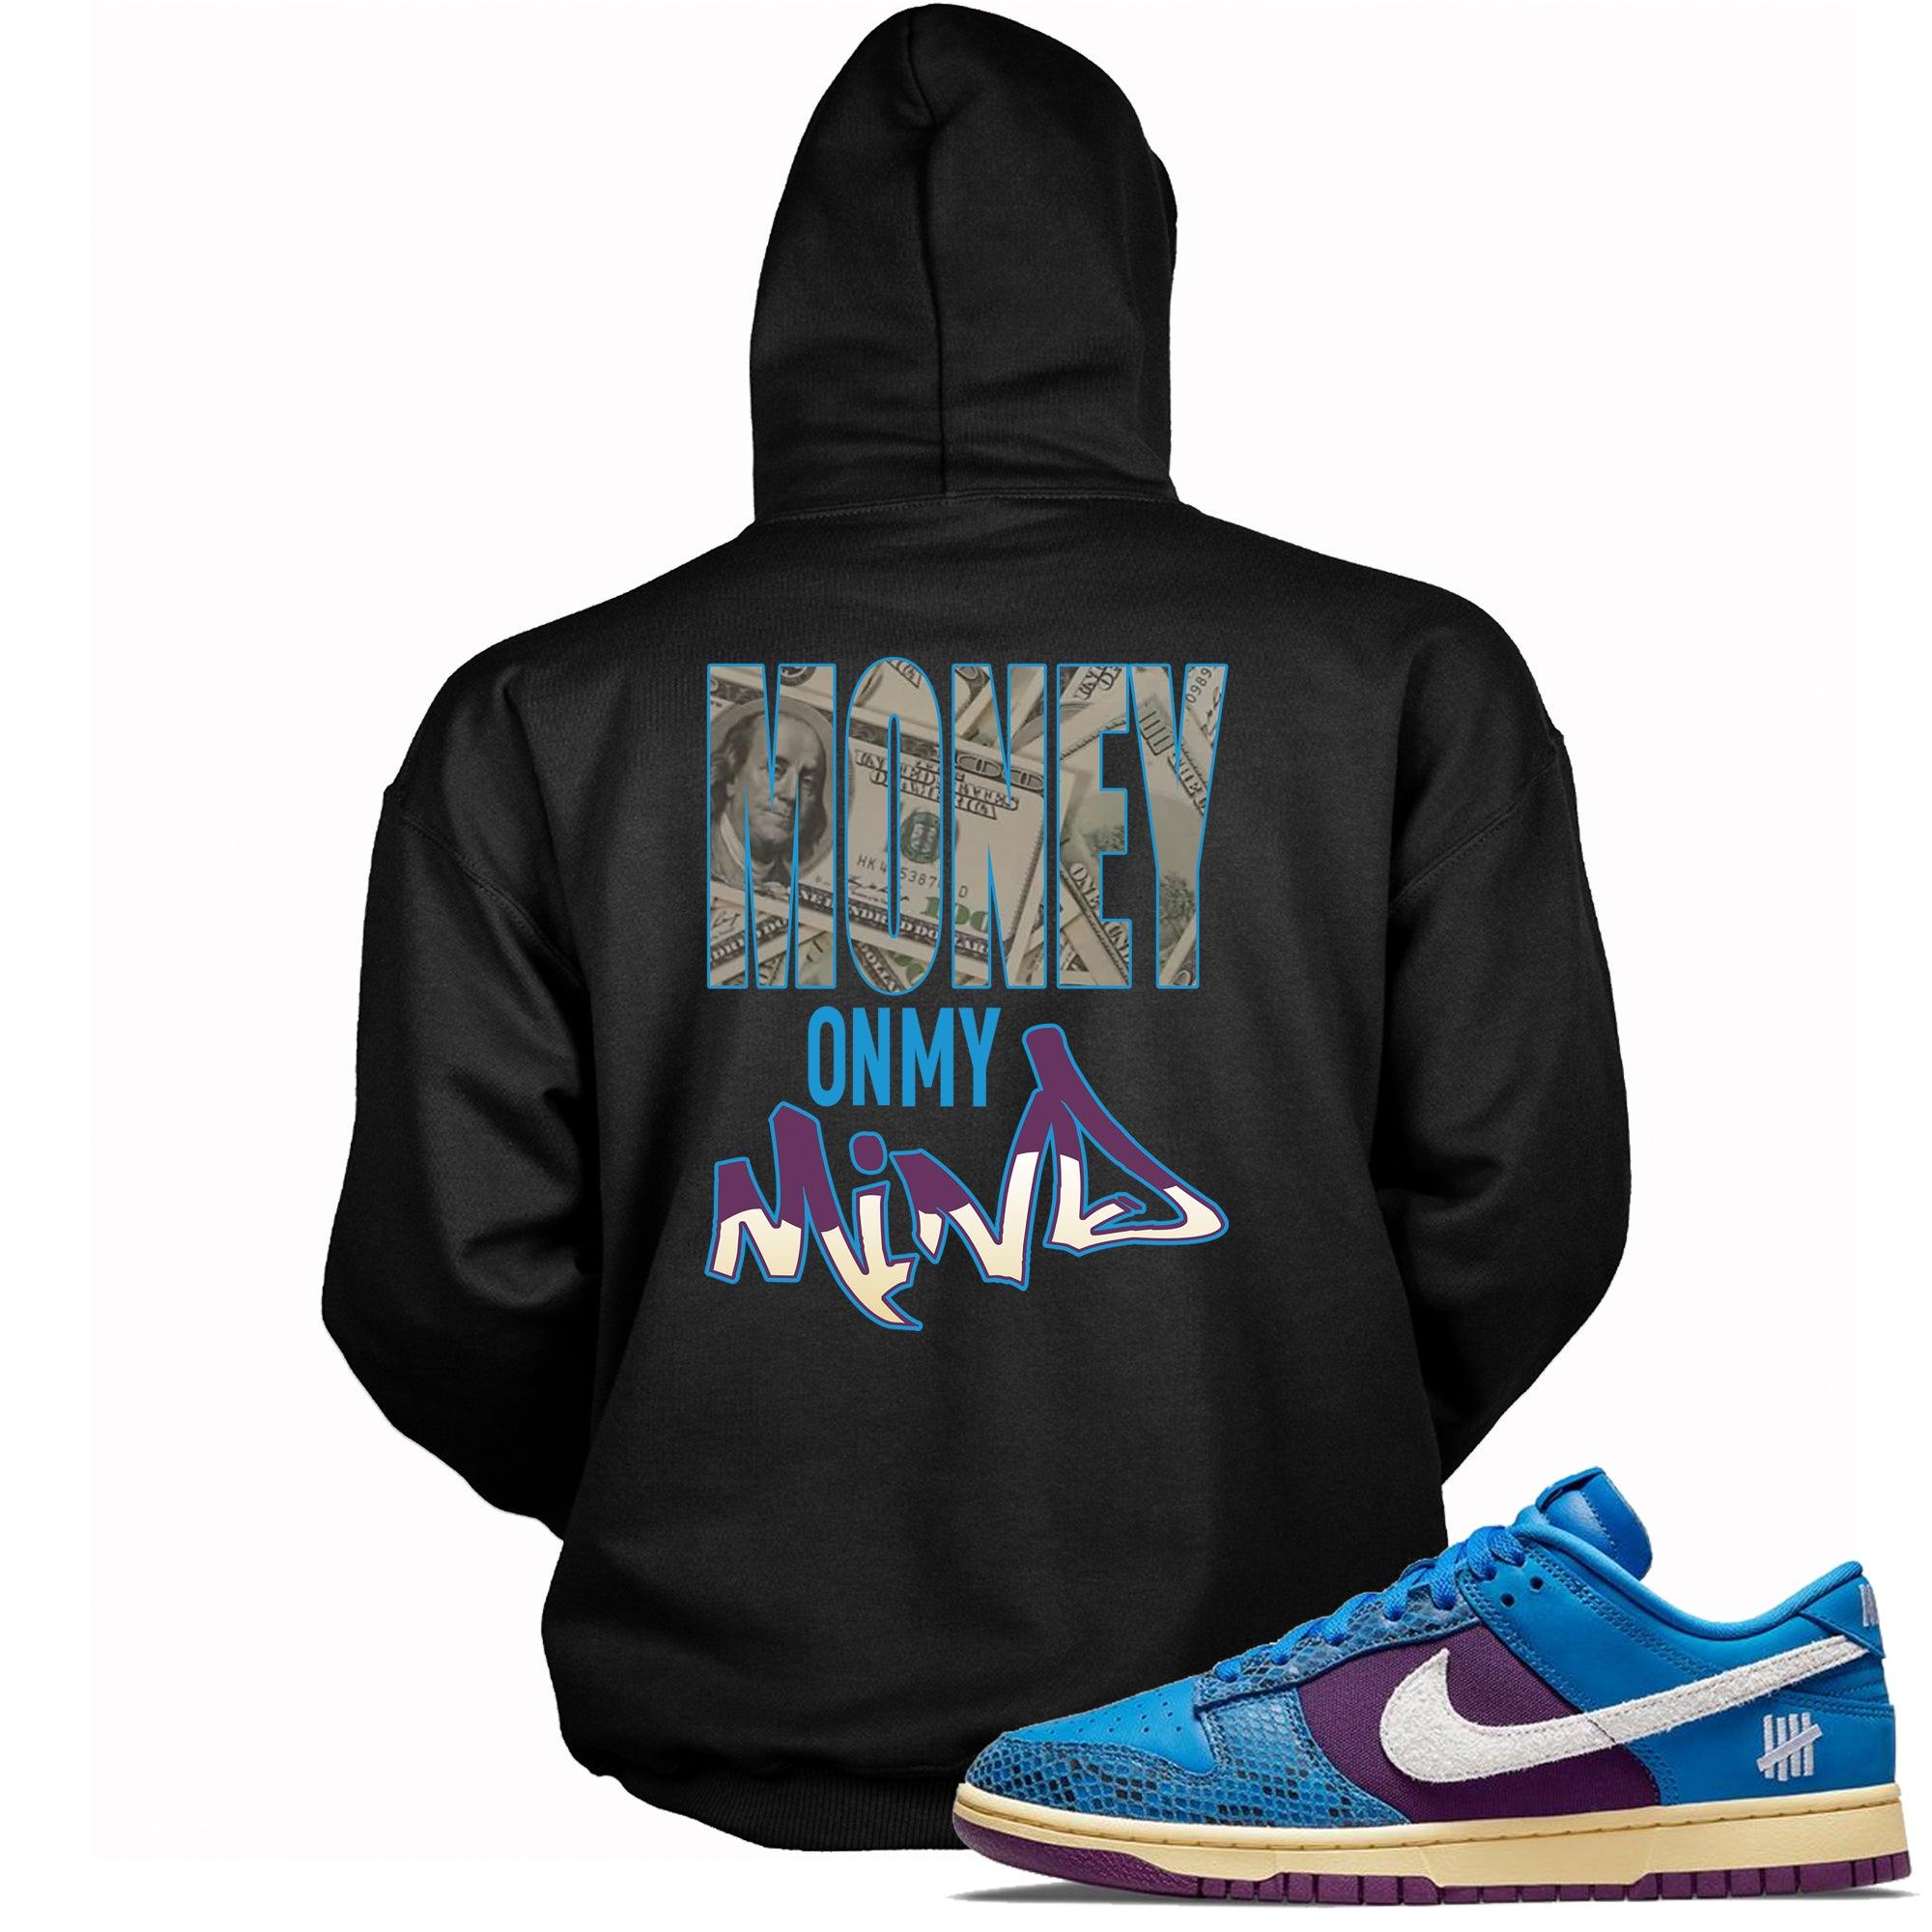 Money On My Mind Hoodie Nike Dunk Low Undefeated 5 On It Dunk vs AF1 Sneakers photo